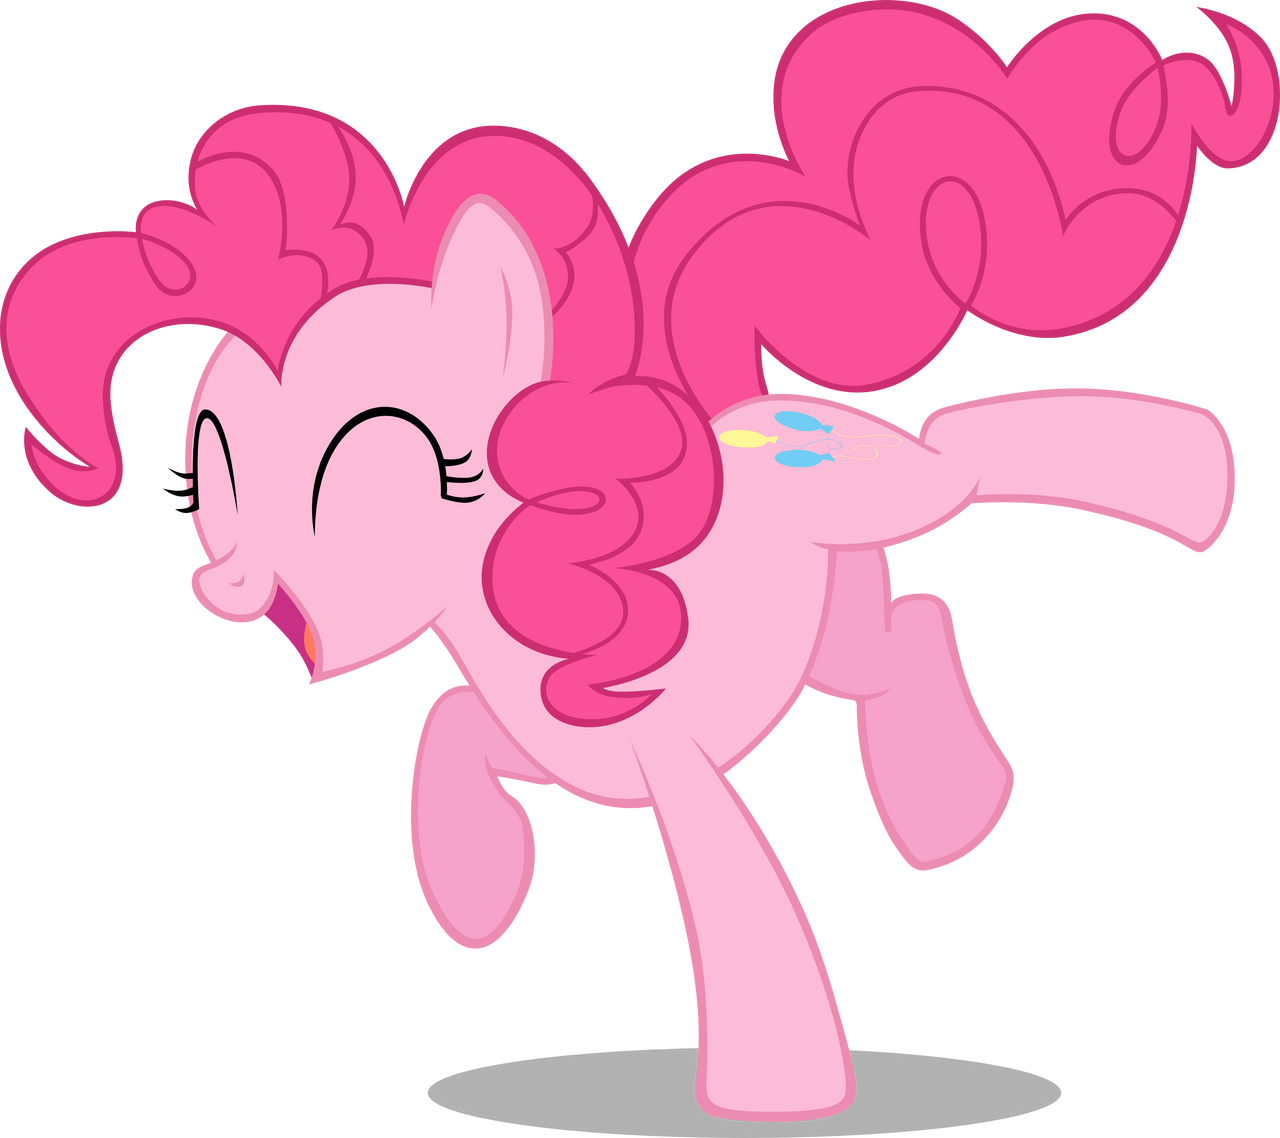 Pinkie Pie: PARTY TIME